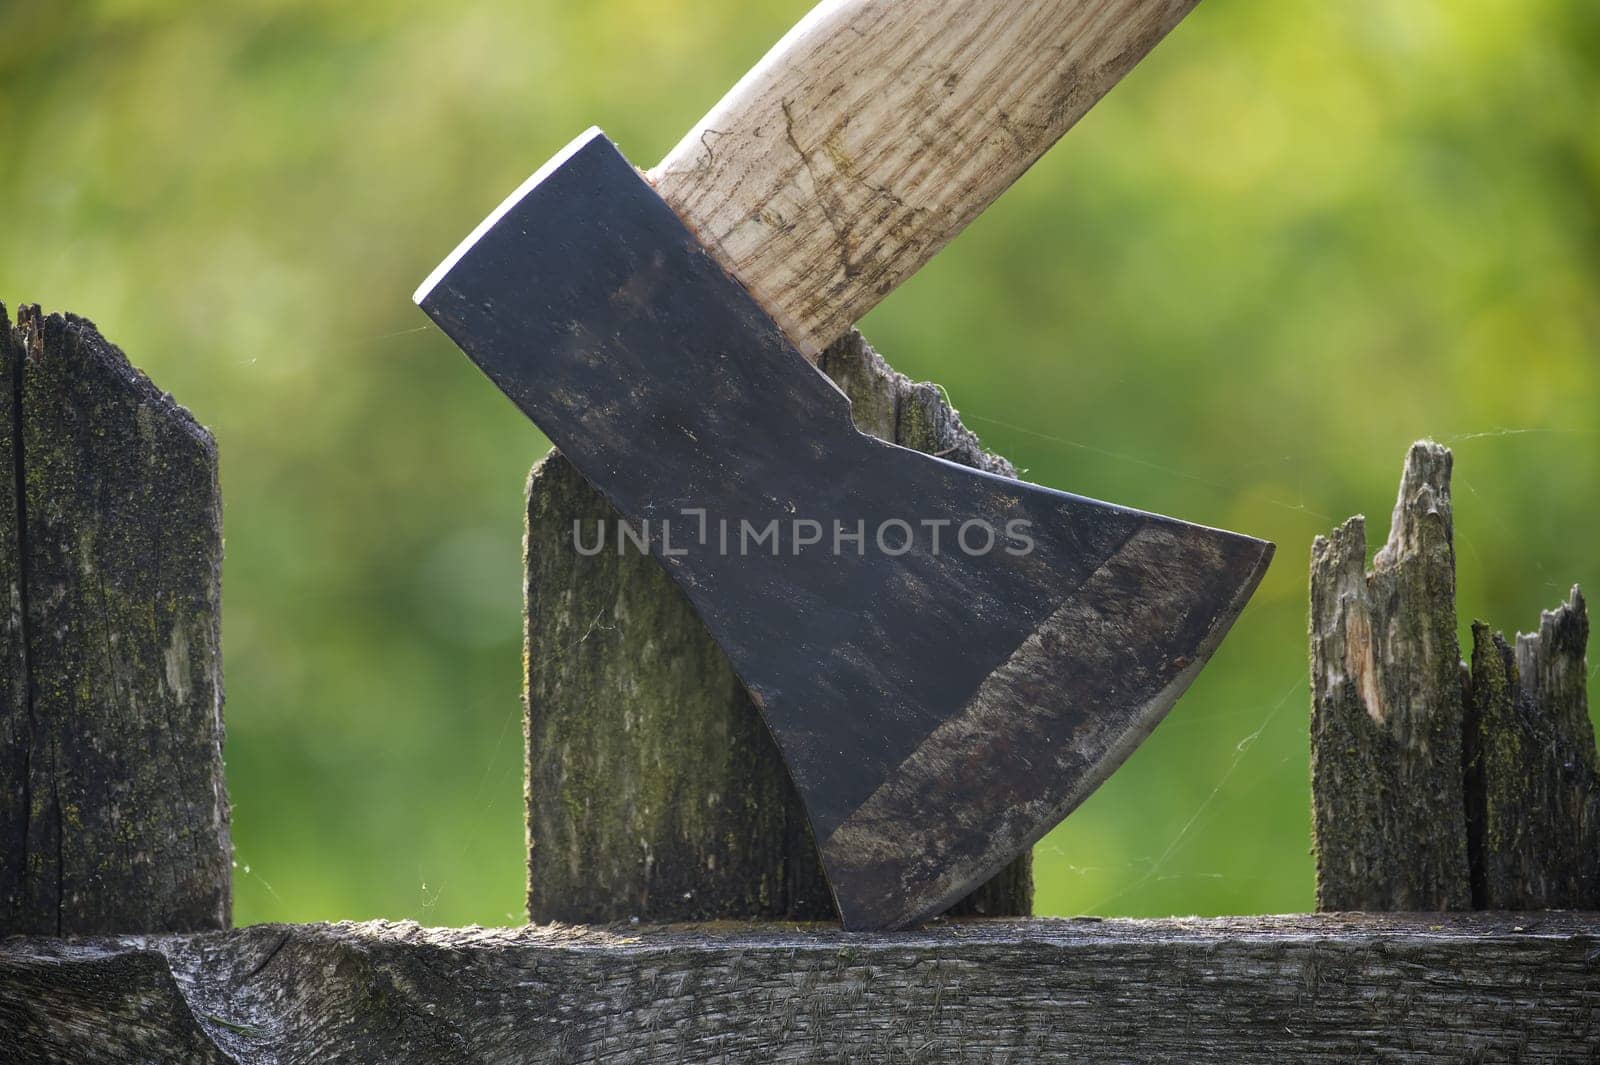 Close up of an axe with brown handle and dark grey blade embedded in an aged, cracked wooden fence post